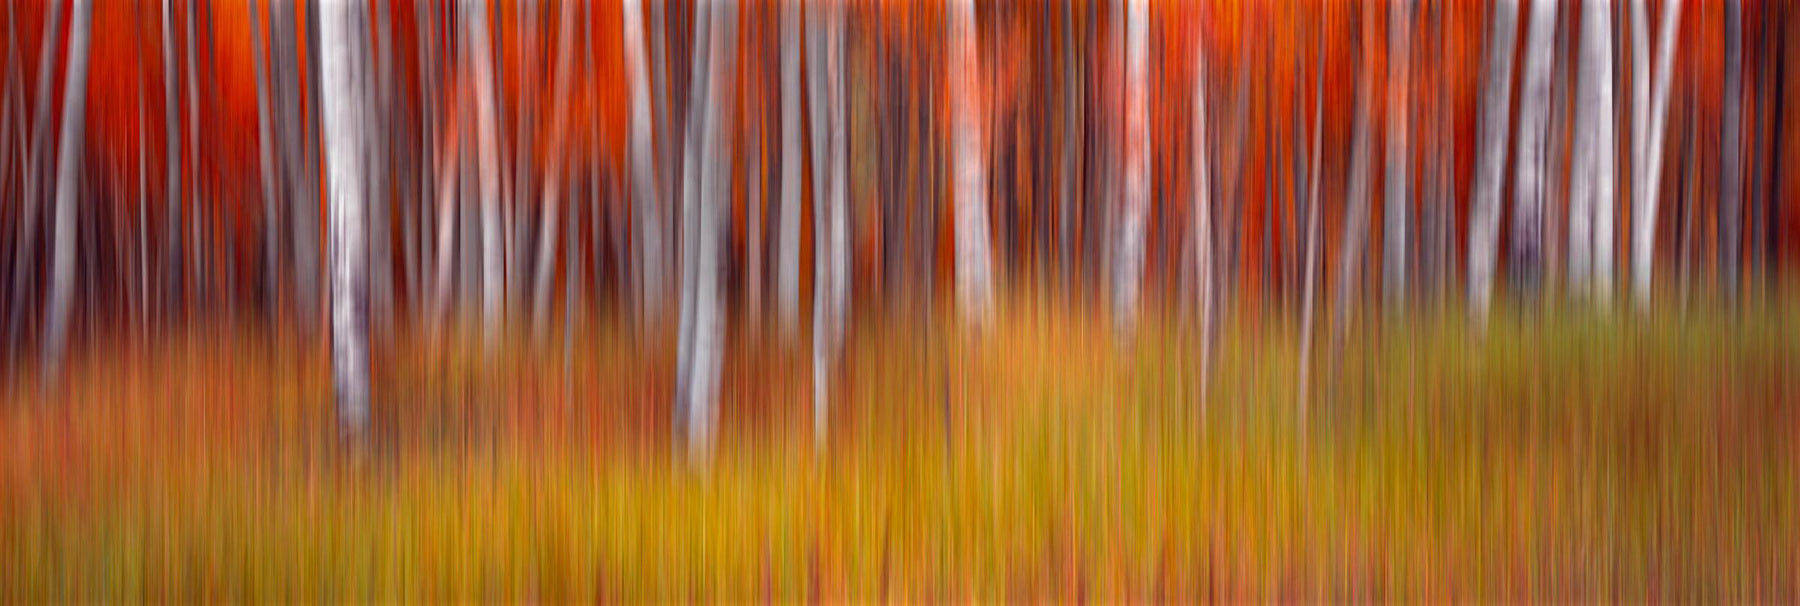 Blurred red and white forest with a green and yellow grass foreground in Aspen Colorado